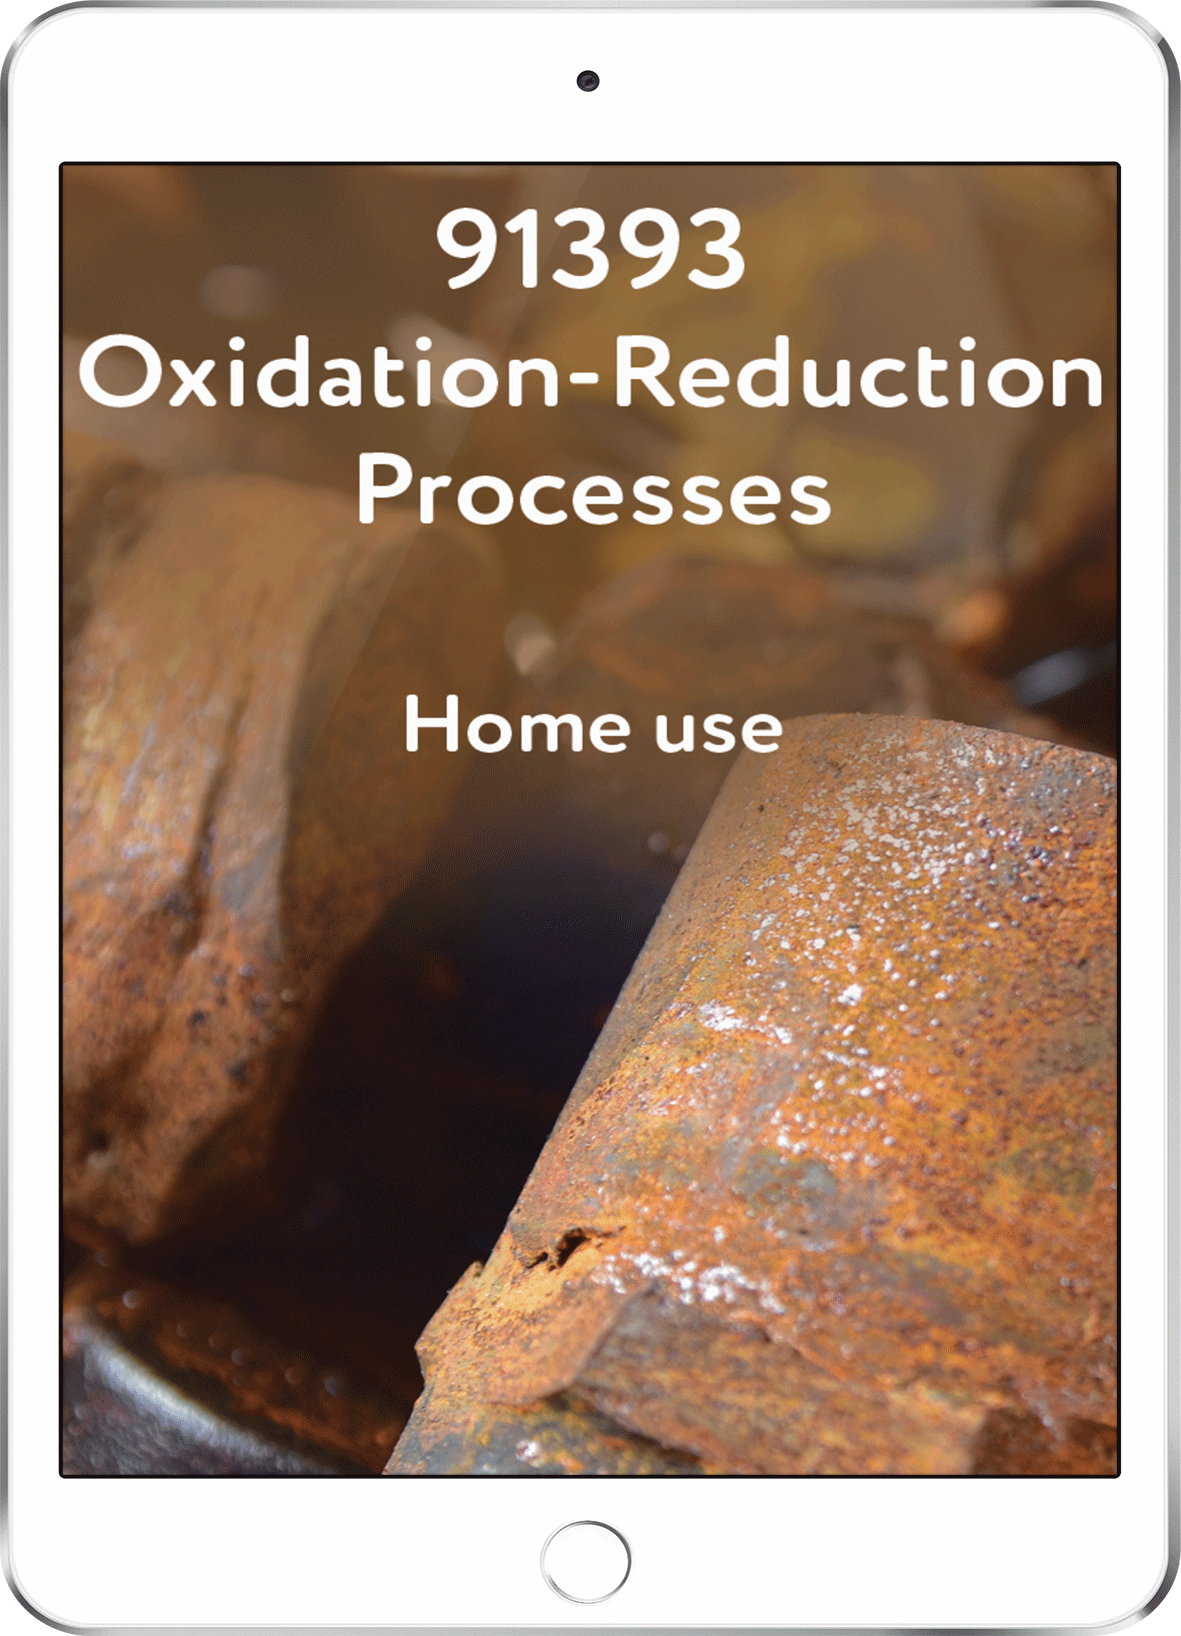 91393 Oxidation-Reduction Processes - Home Use